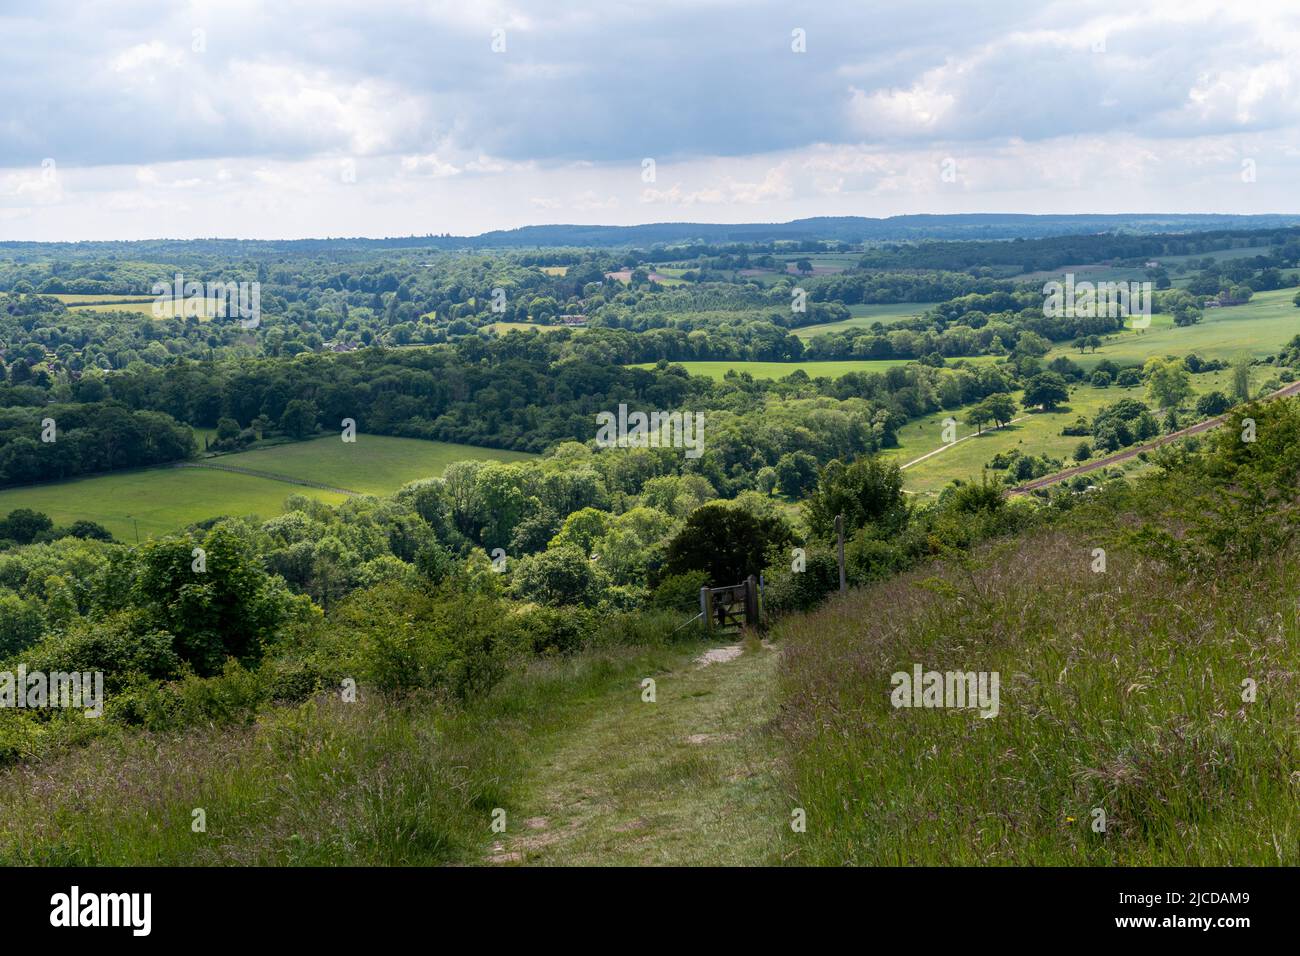 View of Denbies Hillside in the North Downs near Dorking, Surrey, England, UK, during June or early summer Stock Photo